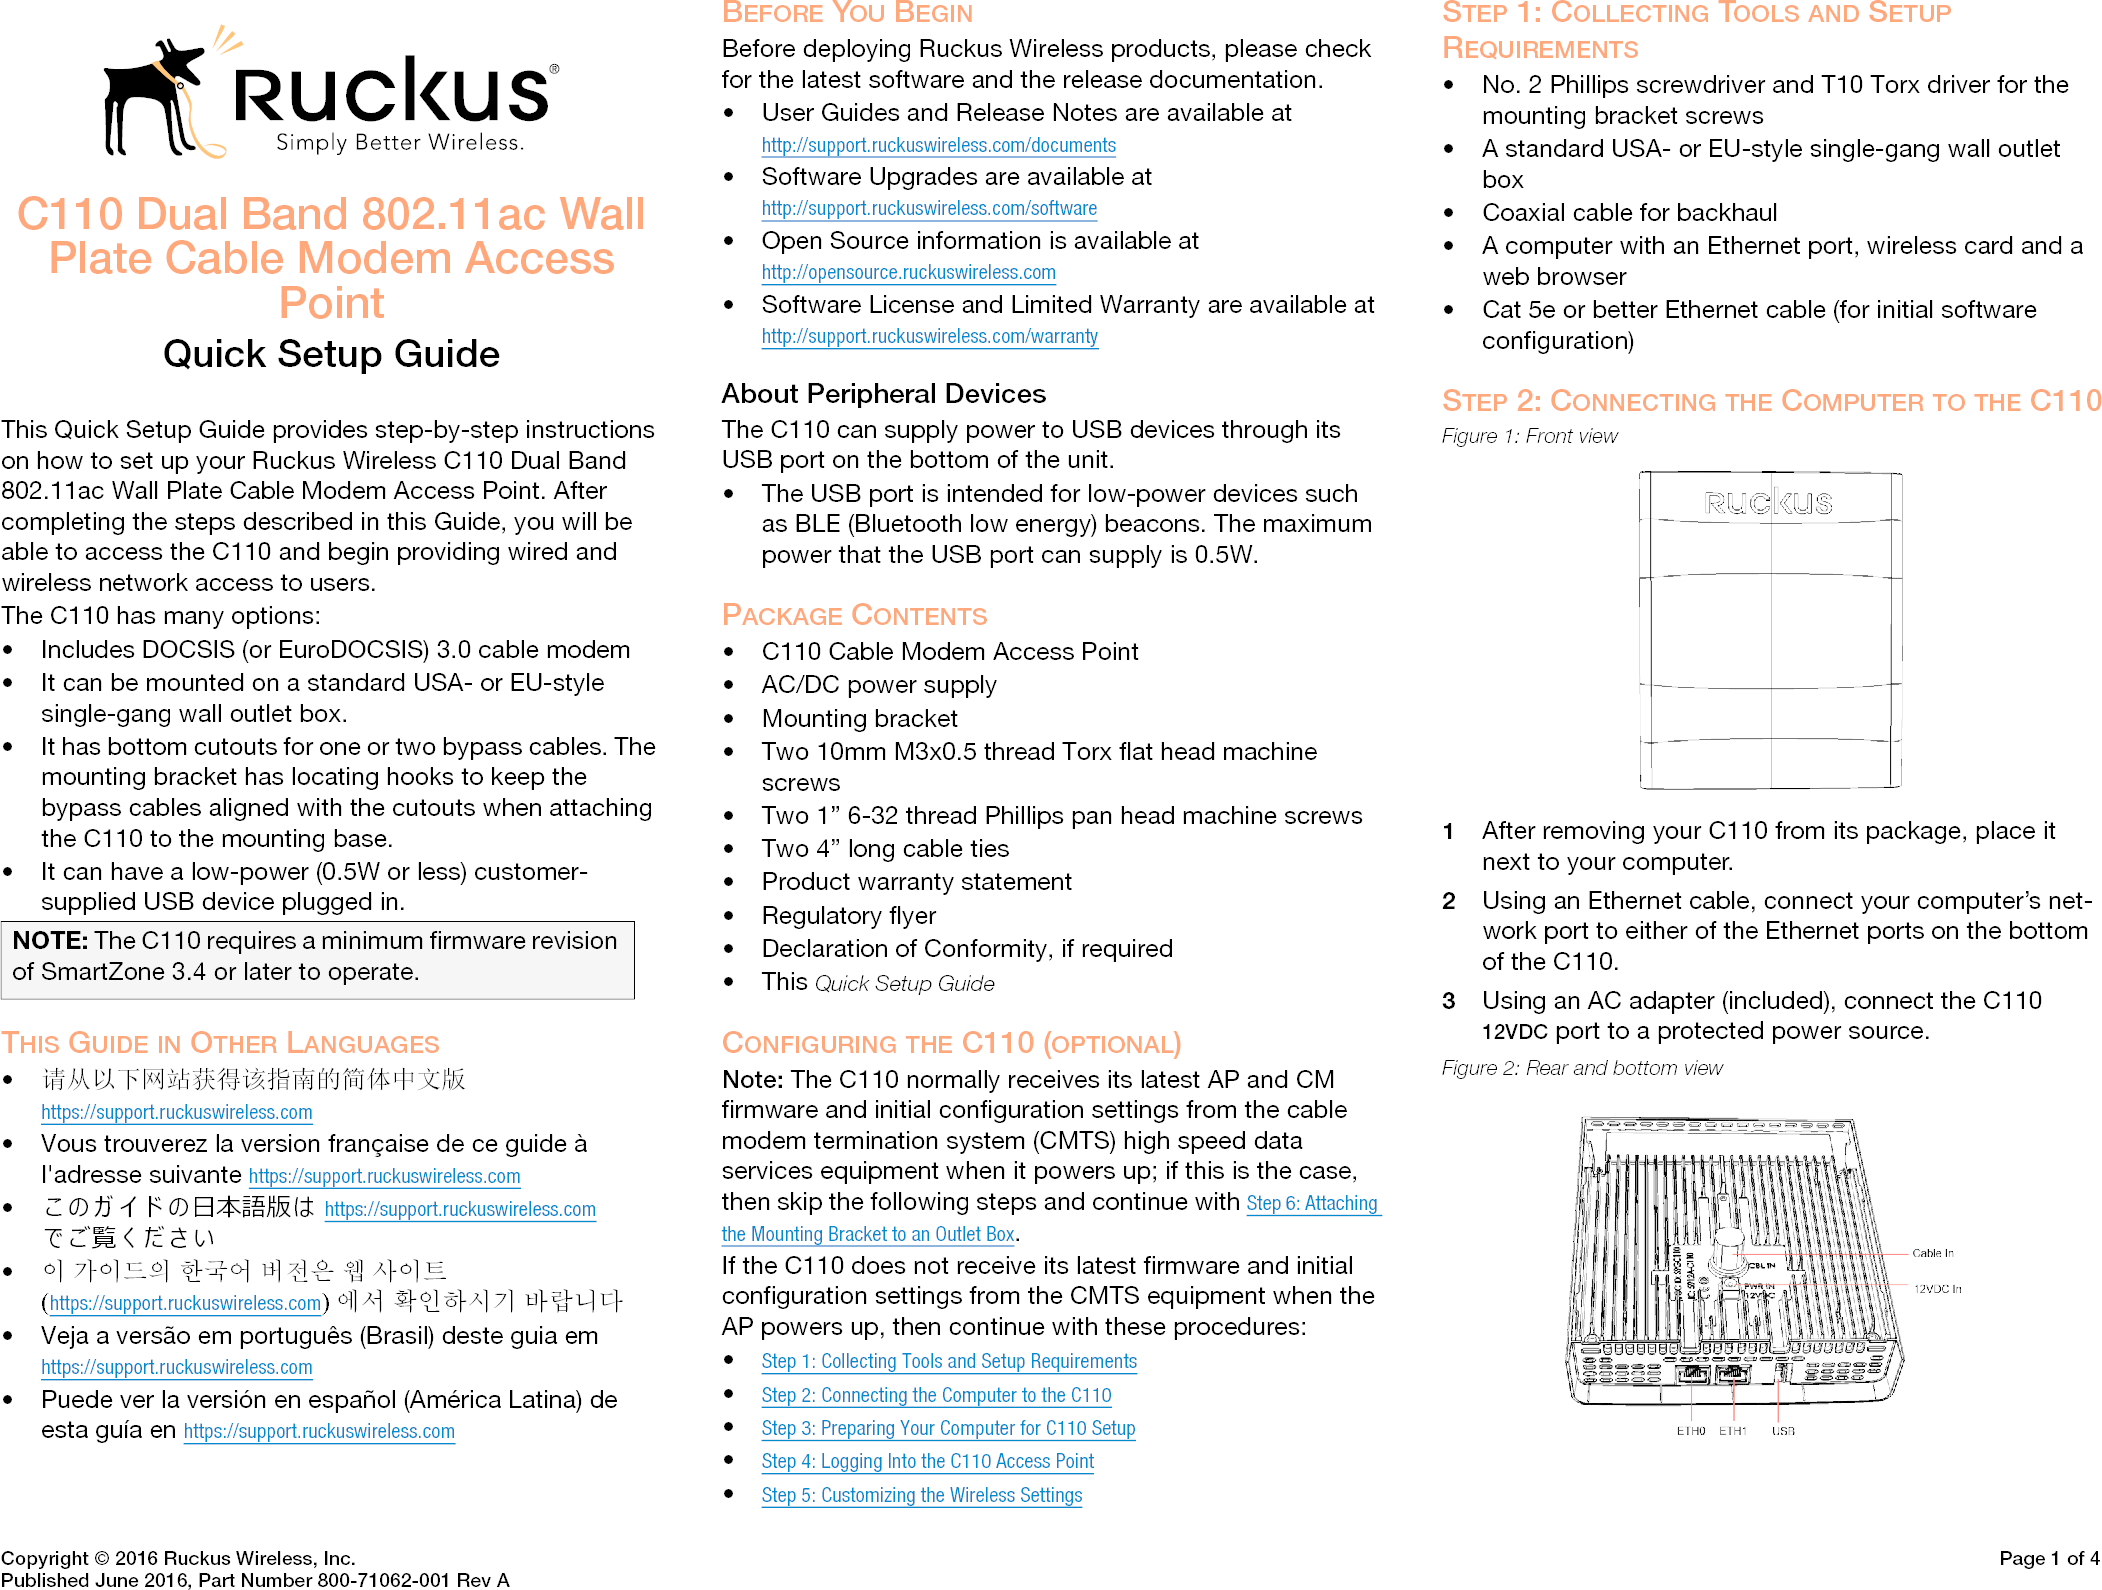 Copyright © 2016 Ruckus Wireless, Inc. Page 1 of 4Published June 2016, Part Number 800-71062-001 Rev AC110 Dual Band 802.11ac Wall Plate Cable Modem Access PointQuick Setup GuideThis Quick Setup Guide provides step-by-step instructions on how to set up your Ruckus Wireless C110 Dual Band 802.11ac Wall Plate Cable Modem Access Point. After completing the steps described in this Guide, you will be able to access the C110 and begin providing wired and wireless network access to users. The C110 has many options: • Includes DOCSIS (or EuroDOCSIS) 3.0 cable modem• It can be mounted on a standard USA- or EU-style single-gang wall outlet box.• It has bottom cutouts for one or two bypass cables. The mounting bracket has locating hooks to keep the bypass cables aligned with the cutouts when attaching the C110 to the mounting base.• It can have a low-power (0.5W or less) customer-supplied USB device plugged in. THIS GUIDE IN OTHER LANGUAGES•请从以下网站获得该指南的简体中文版 https://support.ruckuswireless.com• Vous trouverez la version française de ce guide à l&apos;adresse suivante https://support.ruckuswireless.com•こ の ガ イ ド の⽇本語版は https://support.ruckuswireless.com でご覧く ださい•이 가이드의 한국어 버전은 웹 사이트(https://support.ruckuswireless.com)에서 확인하시기 바랍니다• Veja a versão em português (Brasil) deste guia em https://support.ruckuswireless.com• Puede ver la versión en español (América Latina) de esta guía en https://support.ruckuswireless.comBEFORE YOU BEGINBefore deploying Ruckus Wireless products, please check for the latest software and the release documentation.• User Guides and Release Notes are available at http://support.ruckuswireless.com/documents• Software Upgrades are available athttp://support.ruckuswireless.com/software• Open Source information is available athttp://opensource.ruckuswireless.com• Software License and Limited Warranty are available at http://support.ruckuswireless.com/warrantyAbout Peripheral DevicesThe C110 can supply power to USB devices through its USB port on the bottom of the unit.• The USB port is intended for low-power devices such as BLE (Bluetooth low energy) beacons. The maximum power that the USB port can supply is 0.5W. PACKAGE CONTENTS• C110 Cable Modem Access Point• AC/DC power supply• Mounting bracket• Two 10mm M3x0.5 thread Torx flat head machine screws• Two 1” 6-32 thread Phillips pan head machine screws• Two 4” long cable ties• Product warranty statement• Regulatory flyer• Declaration of Conformity, if required•This Quick Setup GuideCONFIGURING THE C110 (OPTIONAL)Note: The C110 normally receives its latest AP and CM firmware and initial configuration settings from the cable modem termination system (CMTS) high speed data services equipment when it powers up; if this is the case, then skip the following steps and continue with Step 6: Attaching the Mounting Bracket to an Outlet Box.If the C110 does not receive its latest firmware and initial configuration settings from the CMTS equipment when the AP powers up, then continue with these procedures:•Step 1: Collecting Tools and Setup Requirements•Step 2: Connecting the Computer to the C110•Step 3: Preparing Your Computer for C110 Setup•Step 4: Logging Into the C110 Access Point•Step 5: Customizing the Wireless SettingsSTEP 1: COLLECTING TOOLS AND SETUP REQUIREMENTS• No. 2 Phillips screwdriver and T10 Torx driver for the mounting bracket screws• A standard USA- or EU-style single-gang wall outlet box• Coaxial cable for backhaul• A computer with an Ethernet port, wireless card and a web browser• Cat 5e or better Ethernet cable (for initial software configuration)STEP 2: CONNECTING THE COMPUTER TO THE C110Figure 1: Front view1After removing your C110 from its package, place it next to your computer.2Using an Ethernet cable, connect your computer’s net-work port to either of the Ethernet ports on the bottom of the C110. 3Using an AC adapter (included), connect the C110 12VDC port to a protected power source. Figure 2: Rear and bottom viewNOTE: The C110 requires a minimum firmware revision of SmartZone 3.4 or later to operate. 